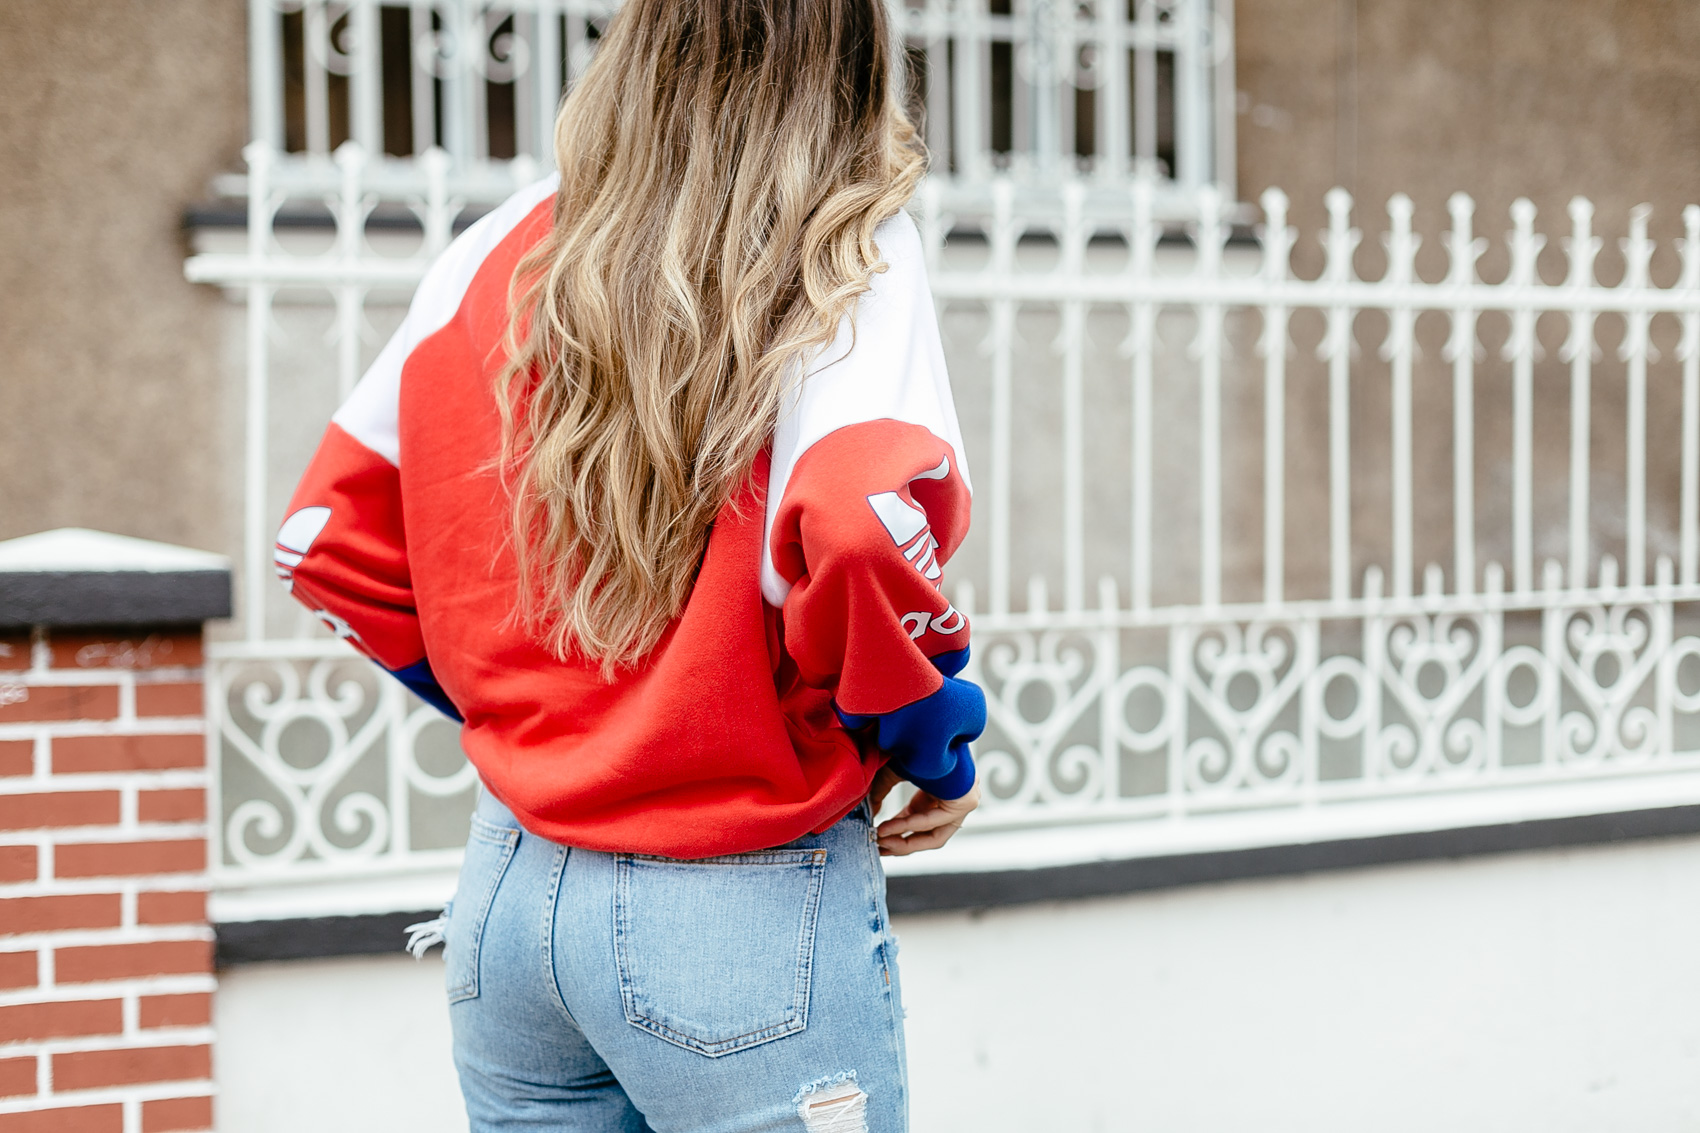 Maristella in a snug fitting vintage style Pull & Bear high waisted mom jeans